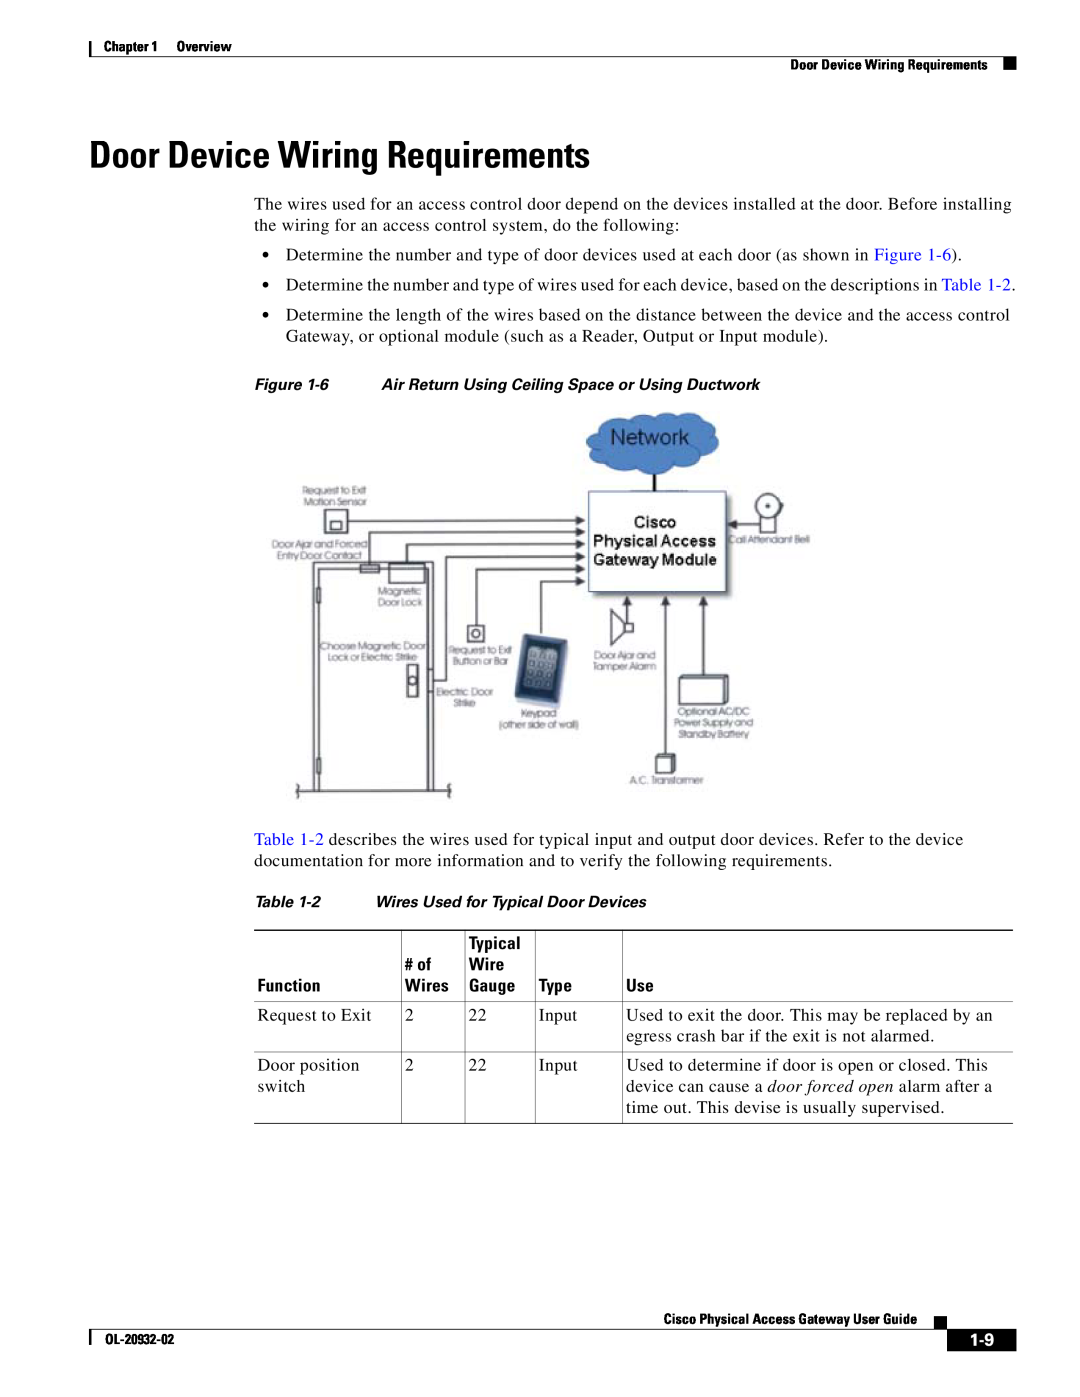 Cisco Systems OL-20932-02 manual Door Device Wiring Requirements, Typical, # of, Function, Wires, Gauge, Type 